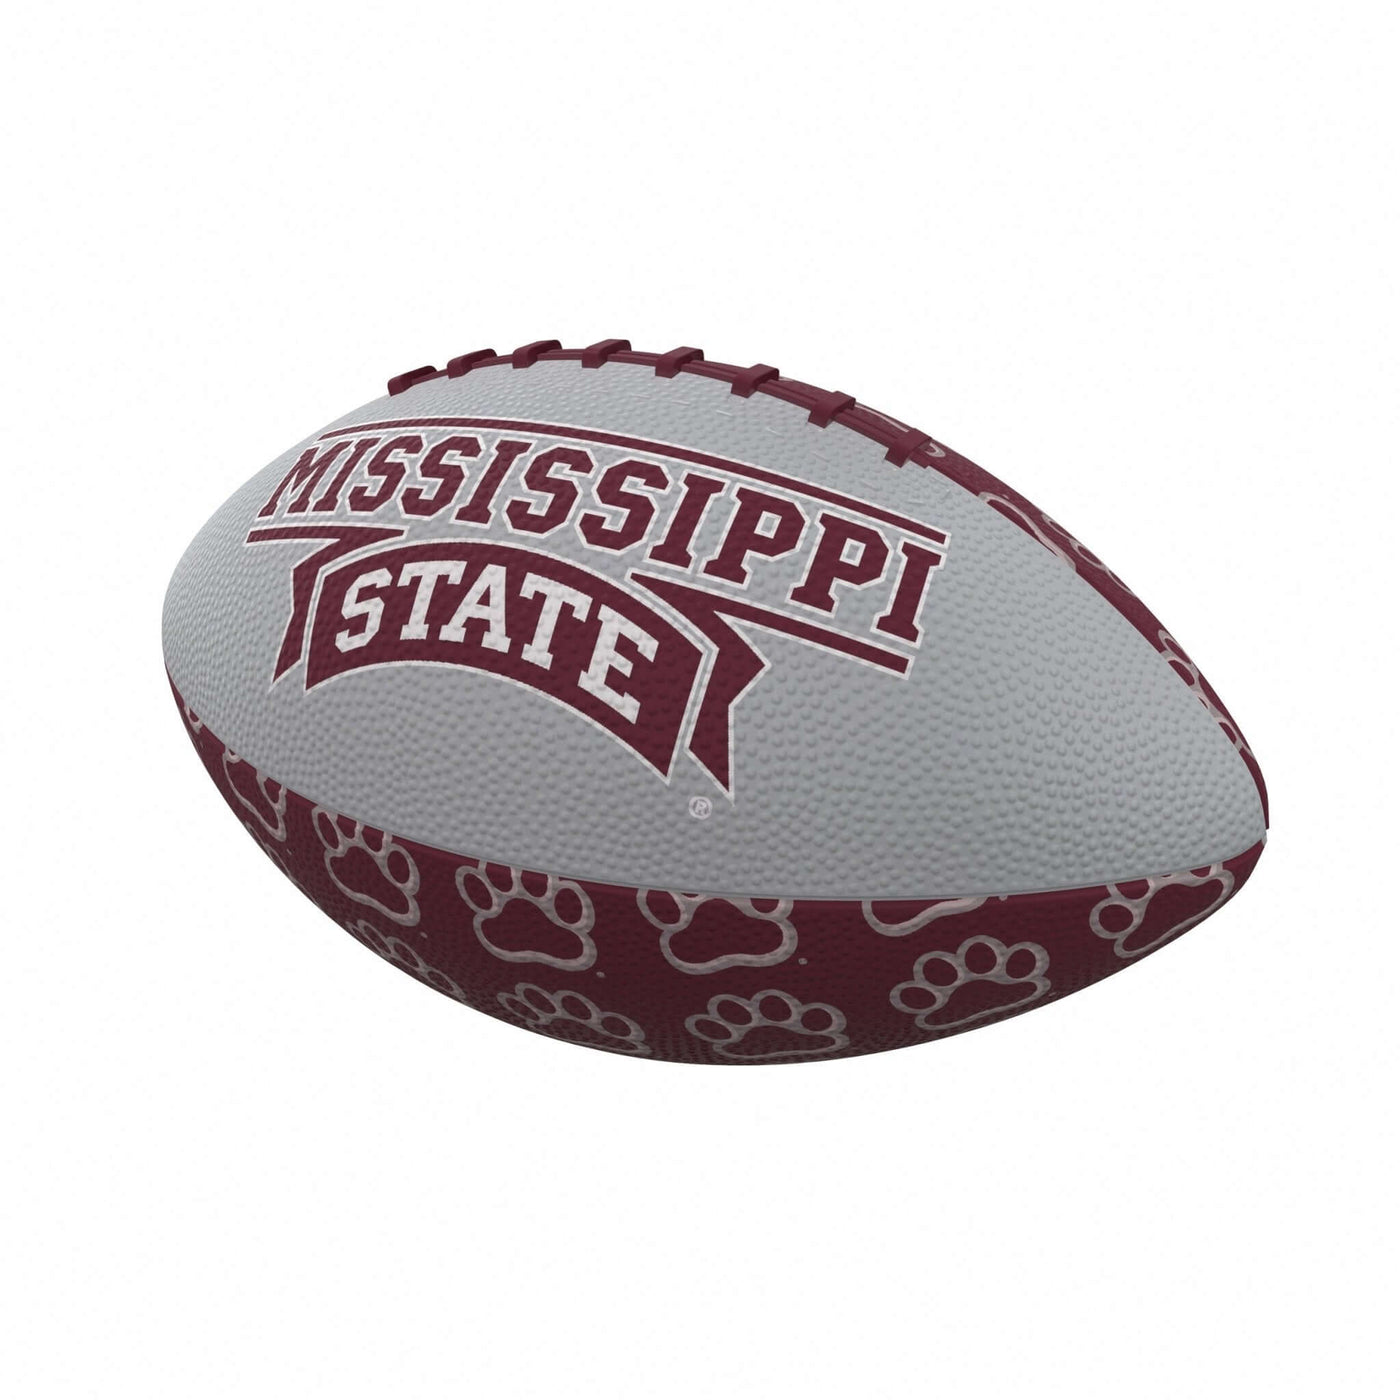 Mississippi State Repeating Mini-Size Rubber Football - Logo Brands